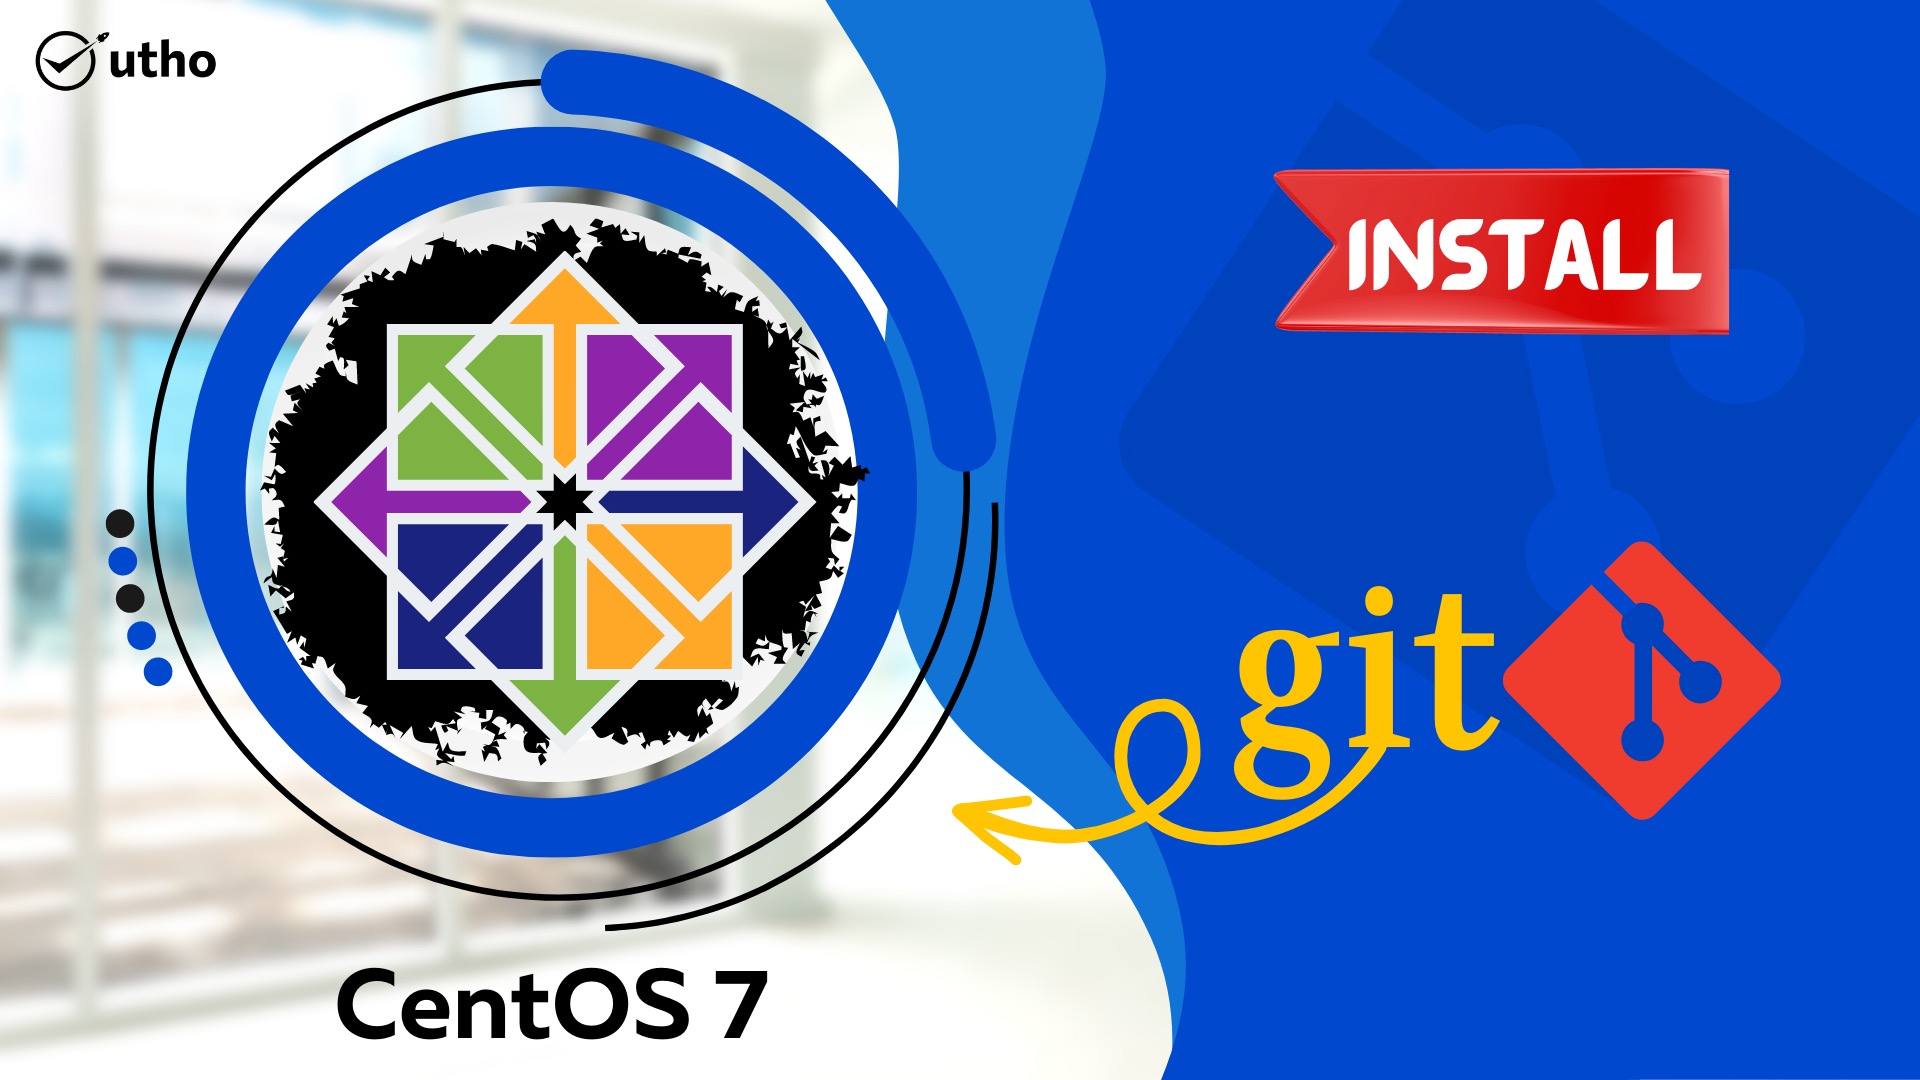 How to install Git on CentOS 7